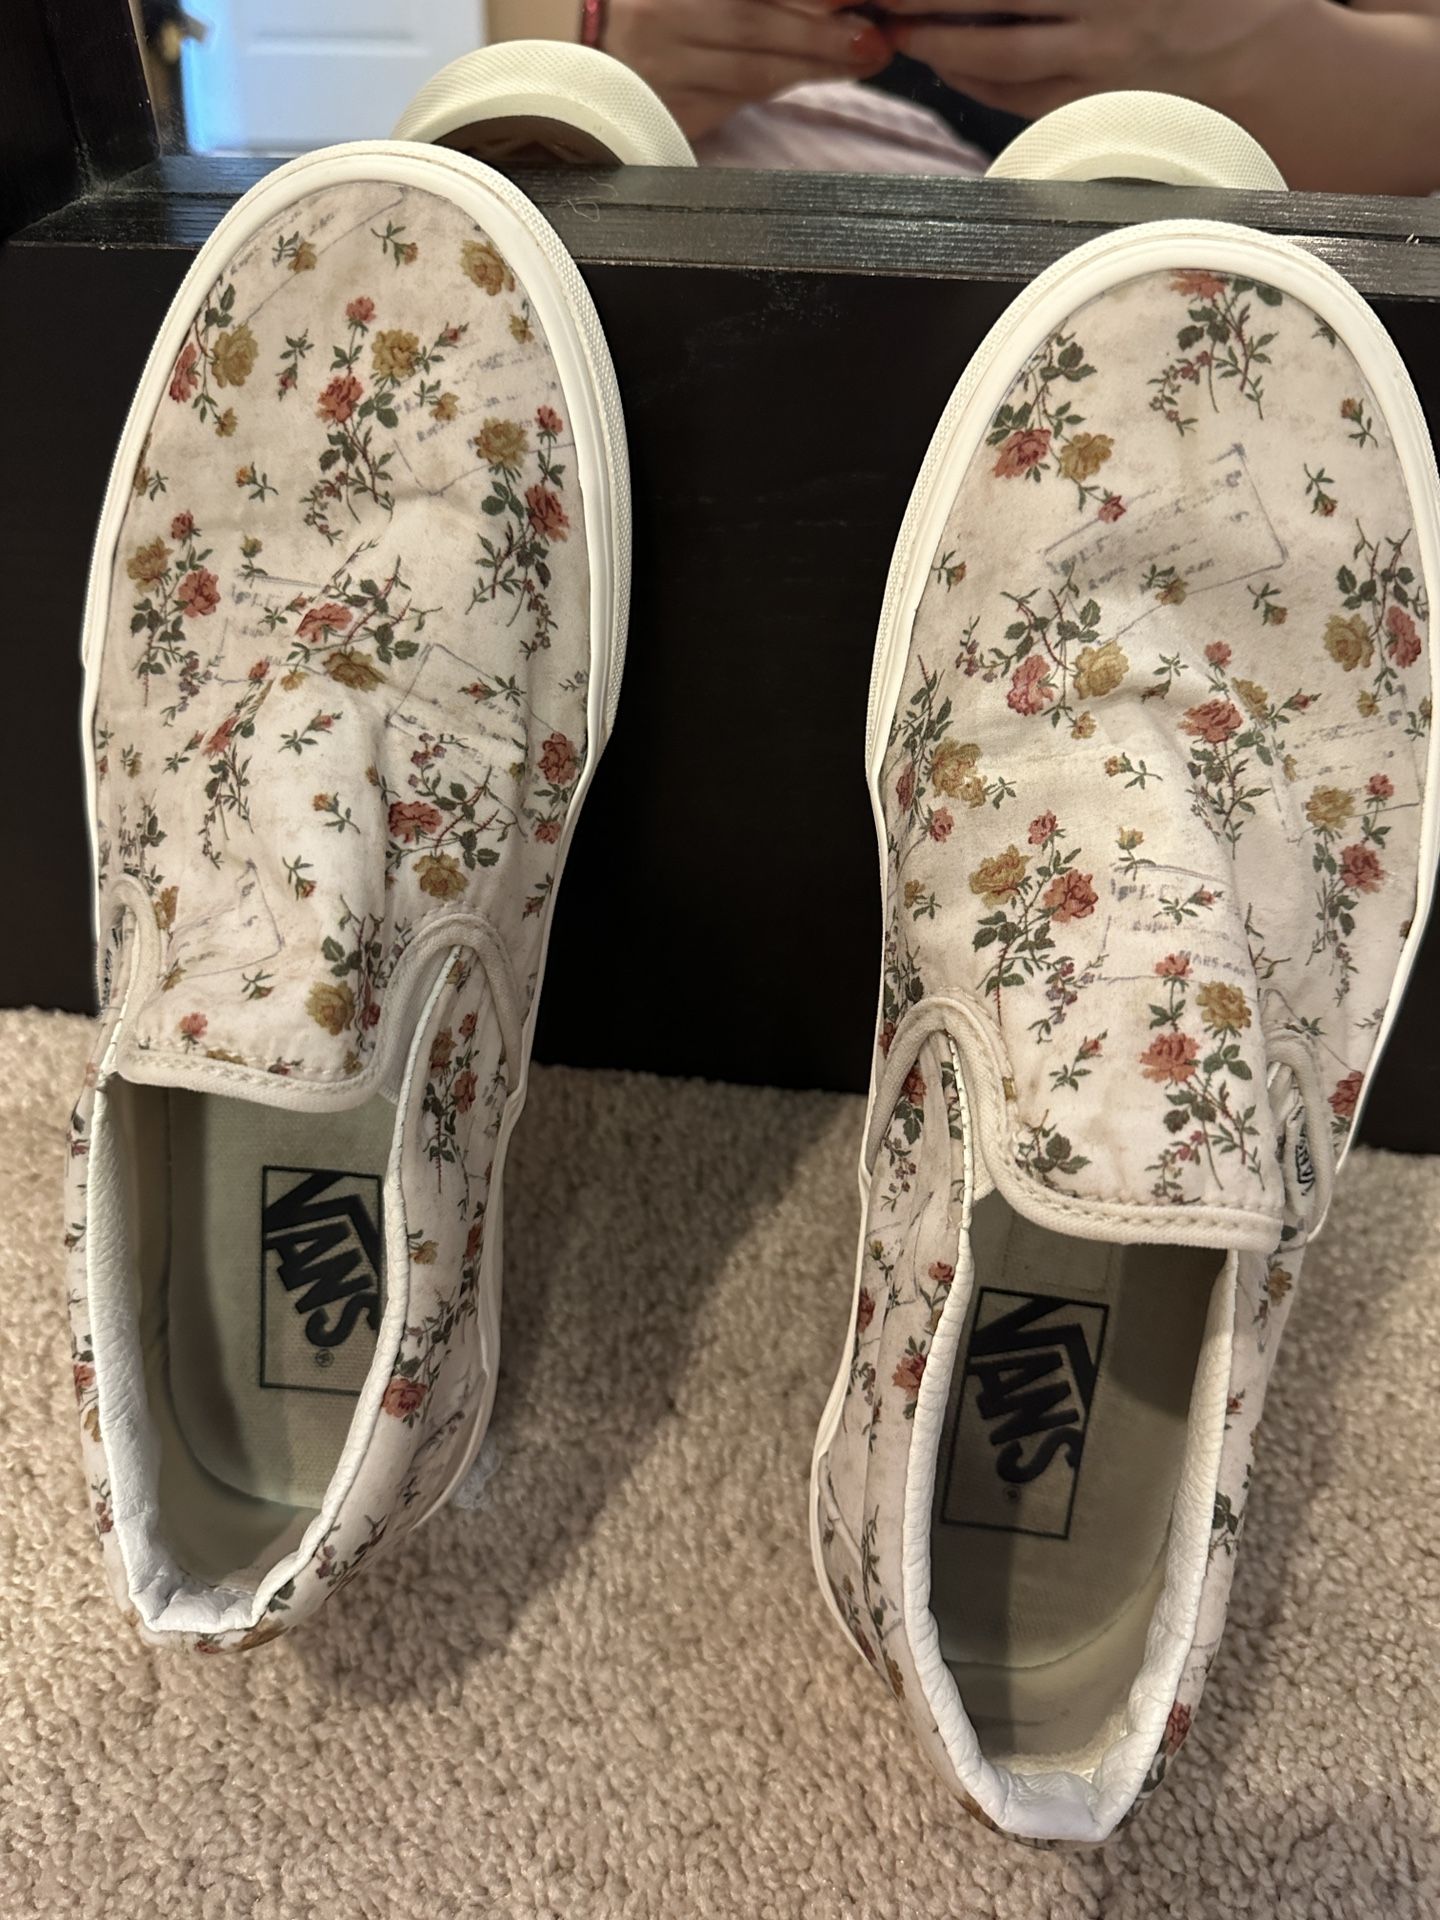 Vans shoes Printed White With Multi Colo Flowers 